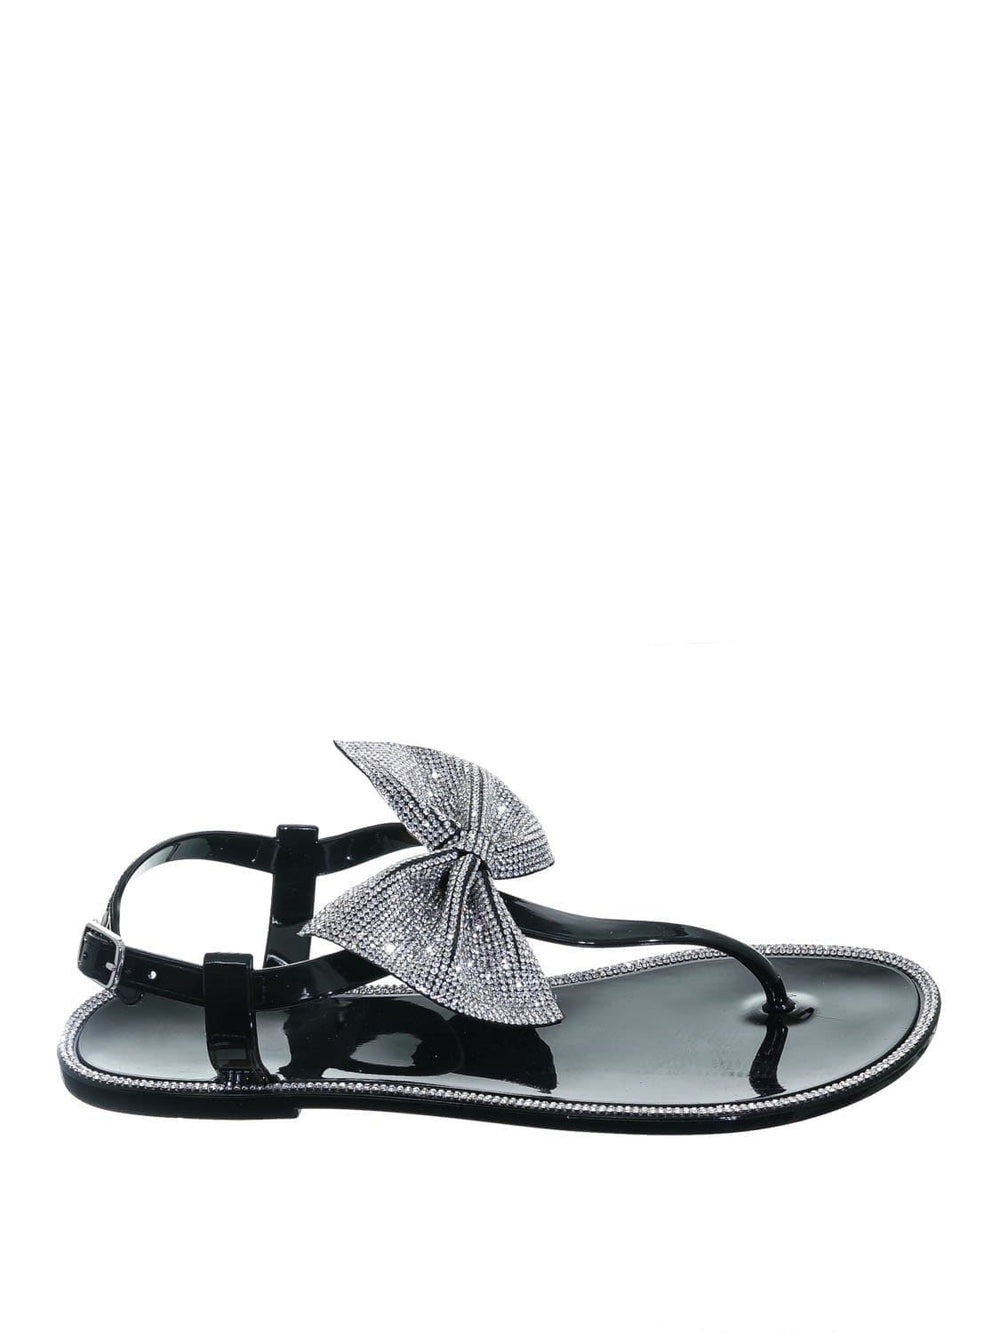 black jelly thong sandals